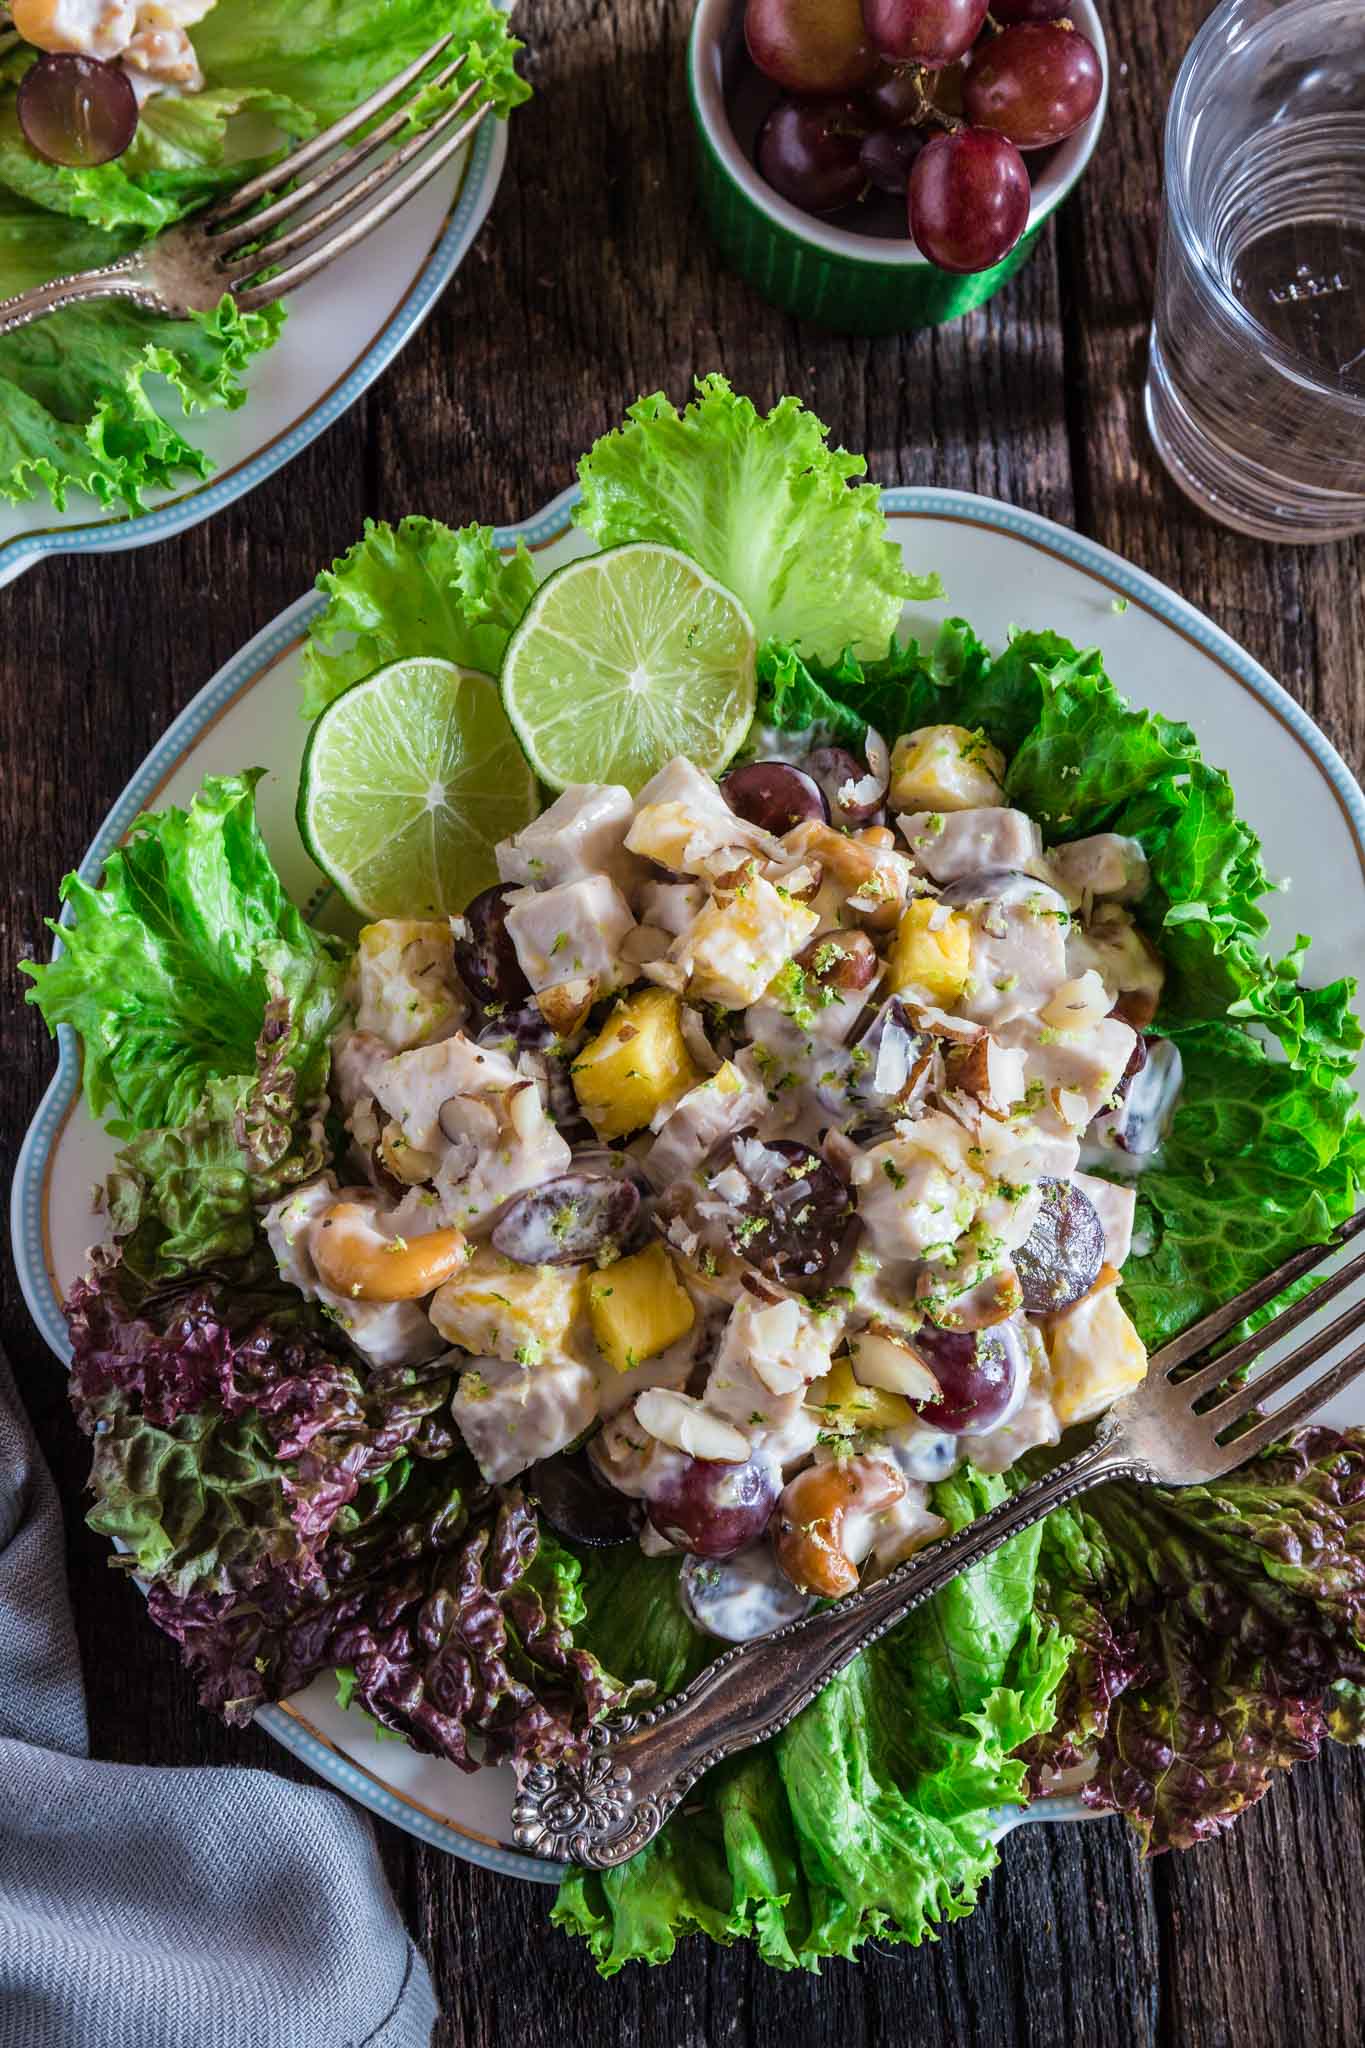 Pineapple Grape Turkey Salad | www.oliviascuisine.com | This delicious tropical twist on a creamy turkey salad makes this the summer salad nobody can resist! Perfect in sandwiches, spread on crackers or just as is. (Recipe and food photography by @oliviascuisine.)